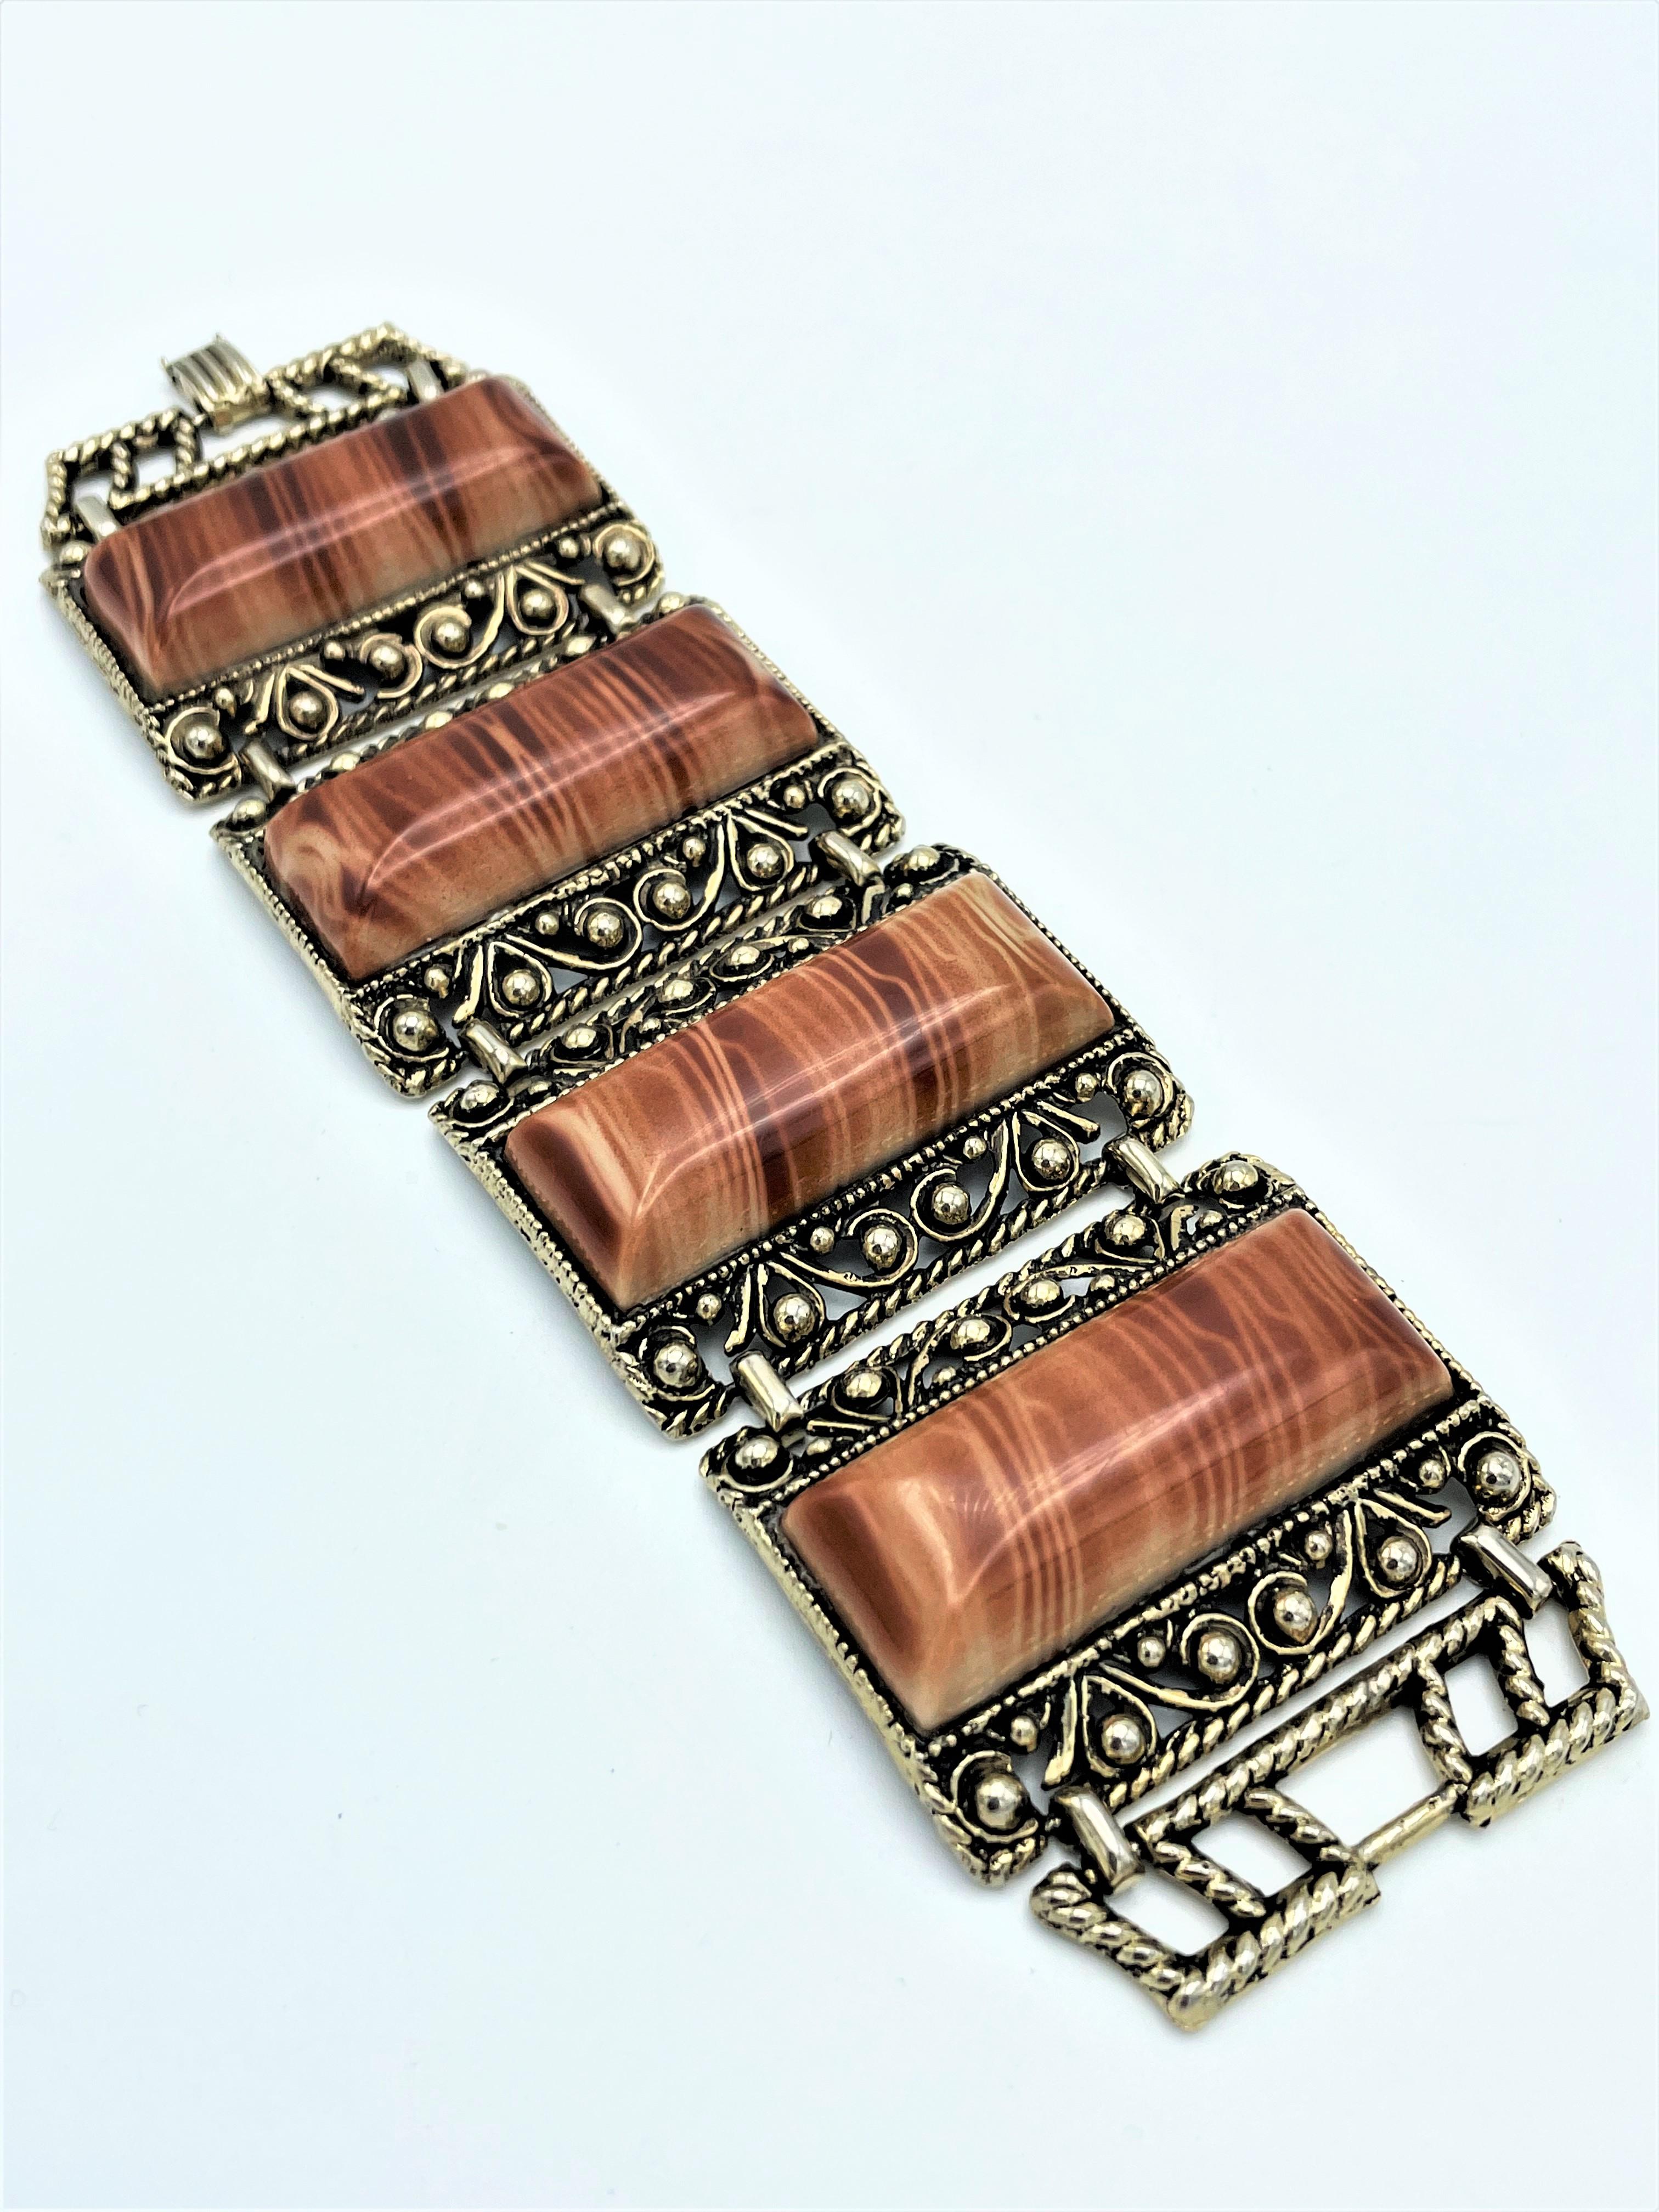  Bracelet consisting of 4 marbled plastic parts edged with fine metal, 1980s USA For Sale 2